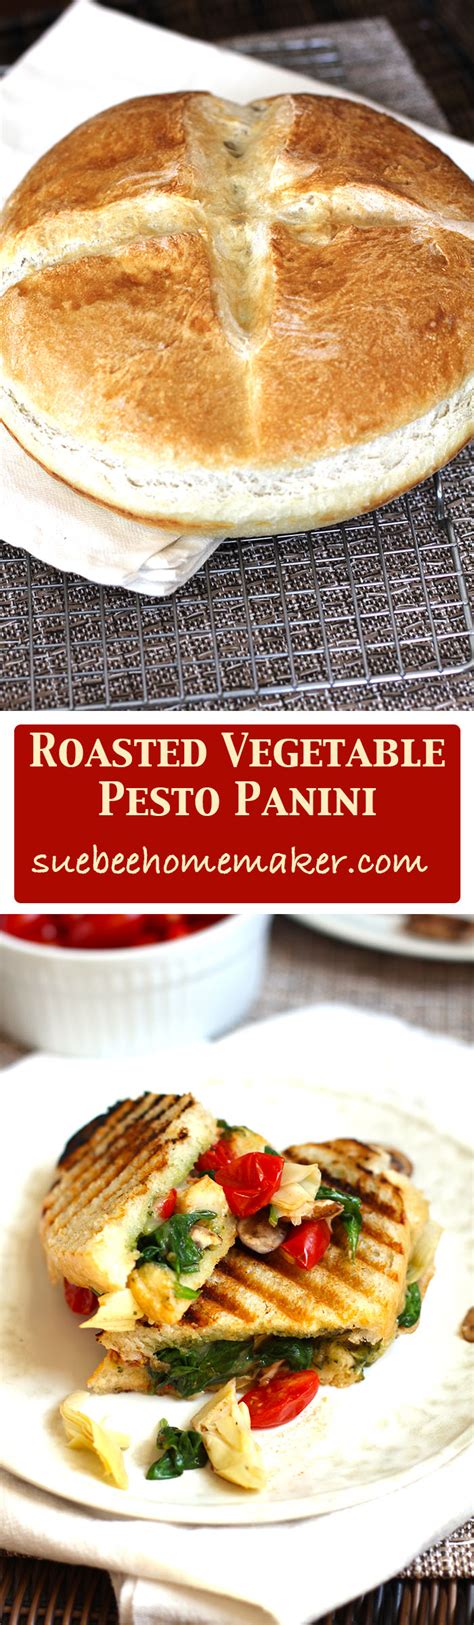 Replace cheese with low protein options (mozzarella and pepper jack). Roasted Vegetable Pesto Panini | Recipe (With images) | Recipes, Simple sandwiches, Food